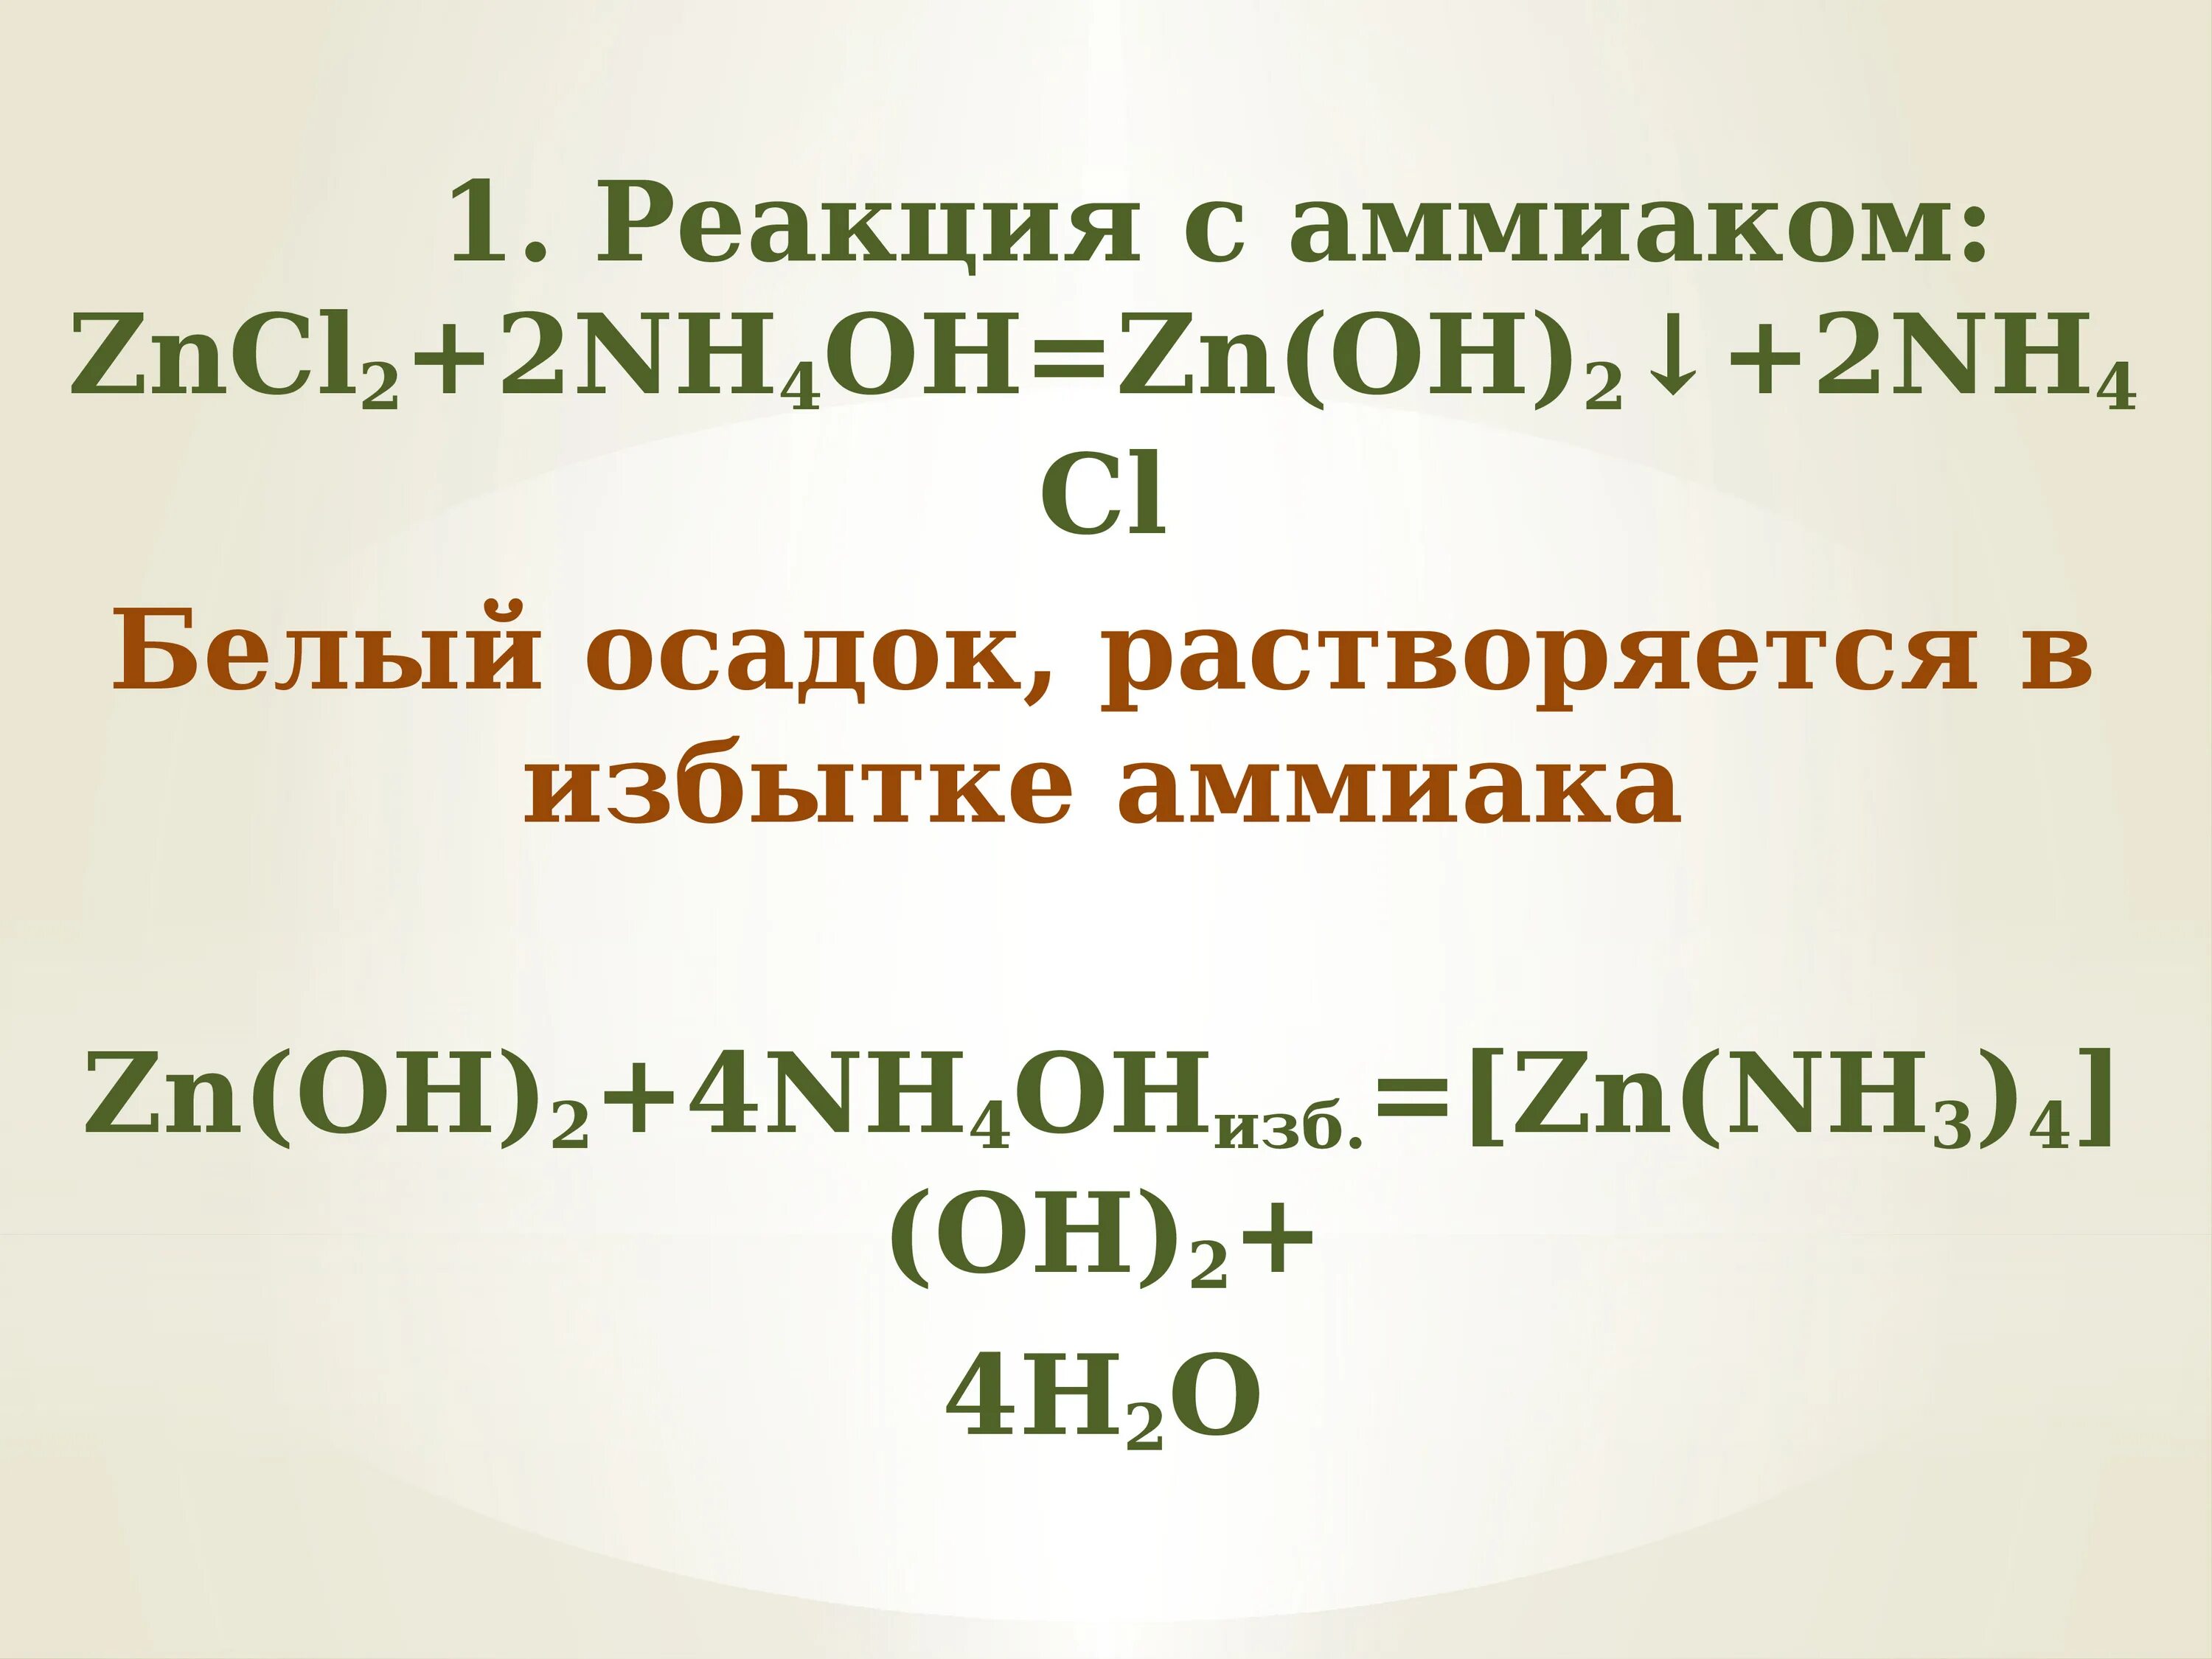 Zncl2 nh3 h2o. ZN Oh 2 nh4oh. Zncl2 nh4oh. [ZN(nh3)4](Oh)2. Zn nh3 4 oh 2 hcl